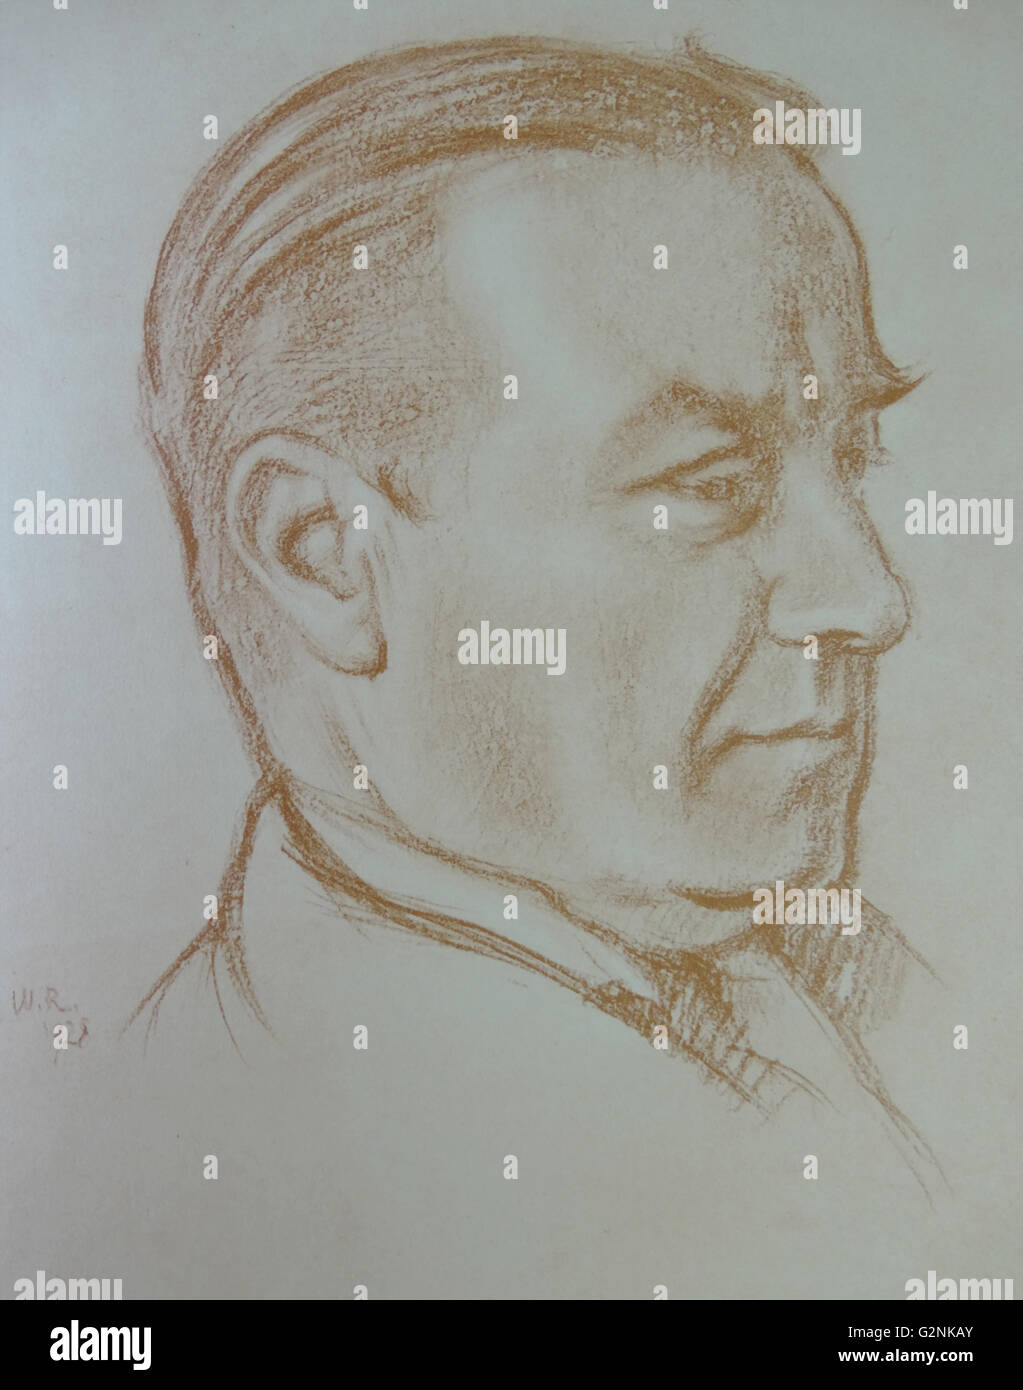 Portrait of The Right Honourable Stanley Baldwin by Sir William Rothenstein. Rothenstein (1872-1945) was an English painter, printmaker and draughtsman. Stock Photo